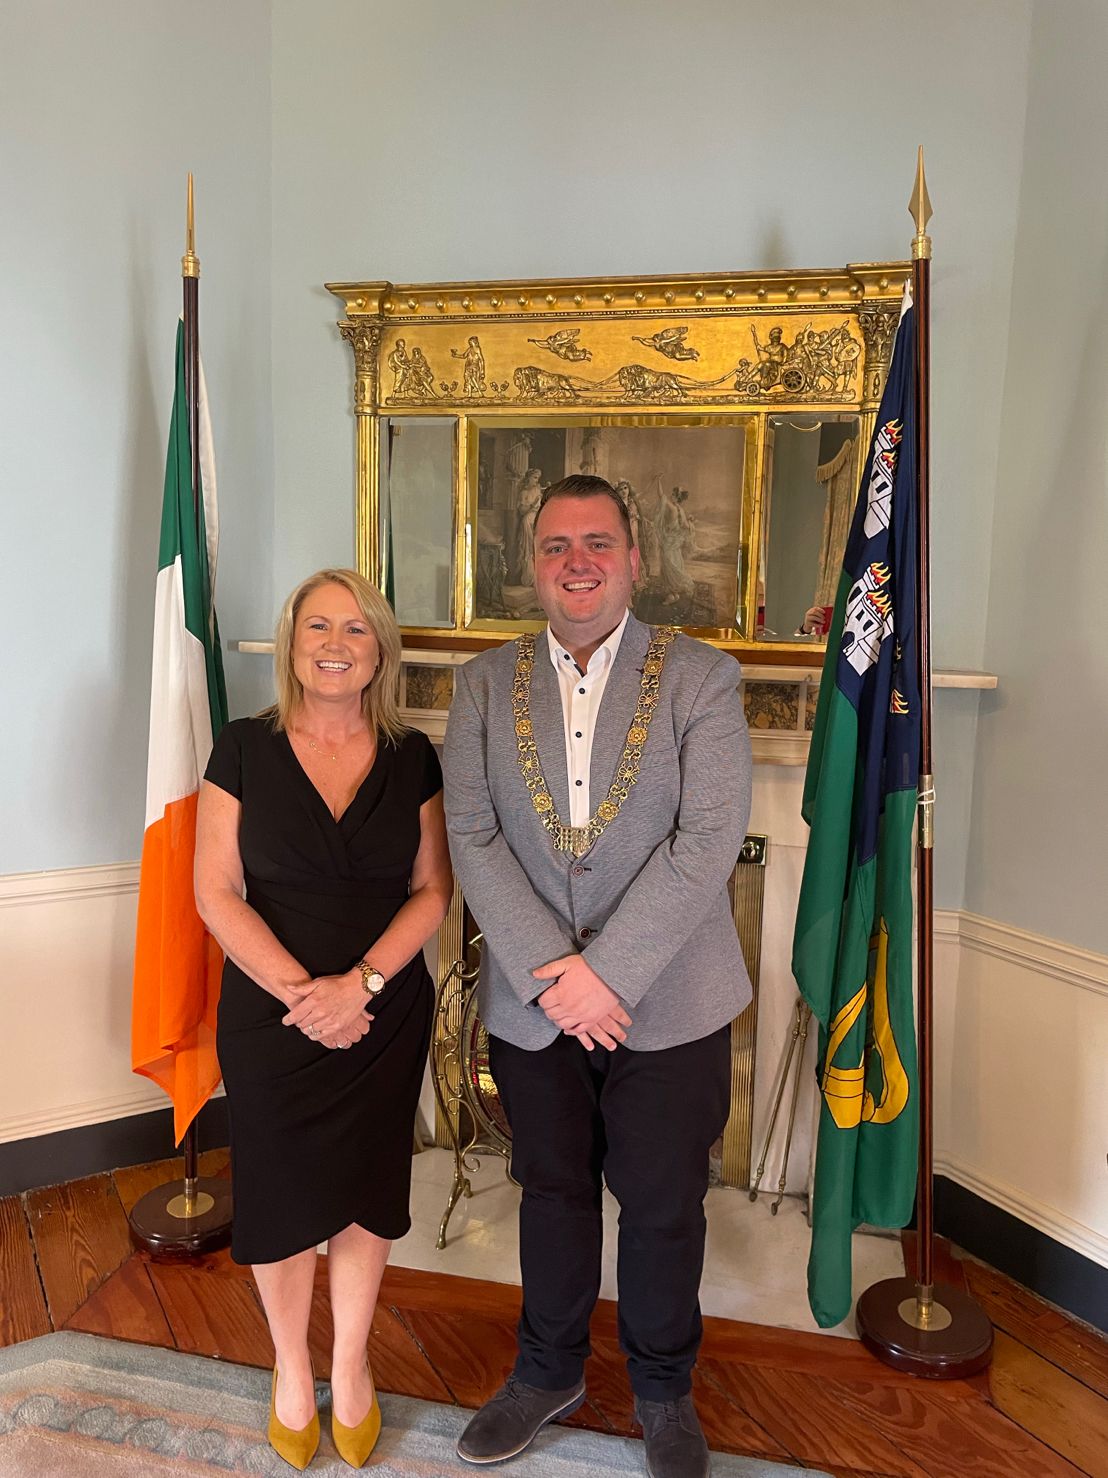 Congratulations to the New Lord Mayor of Dublin